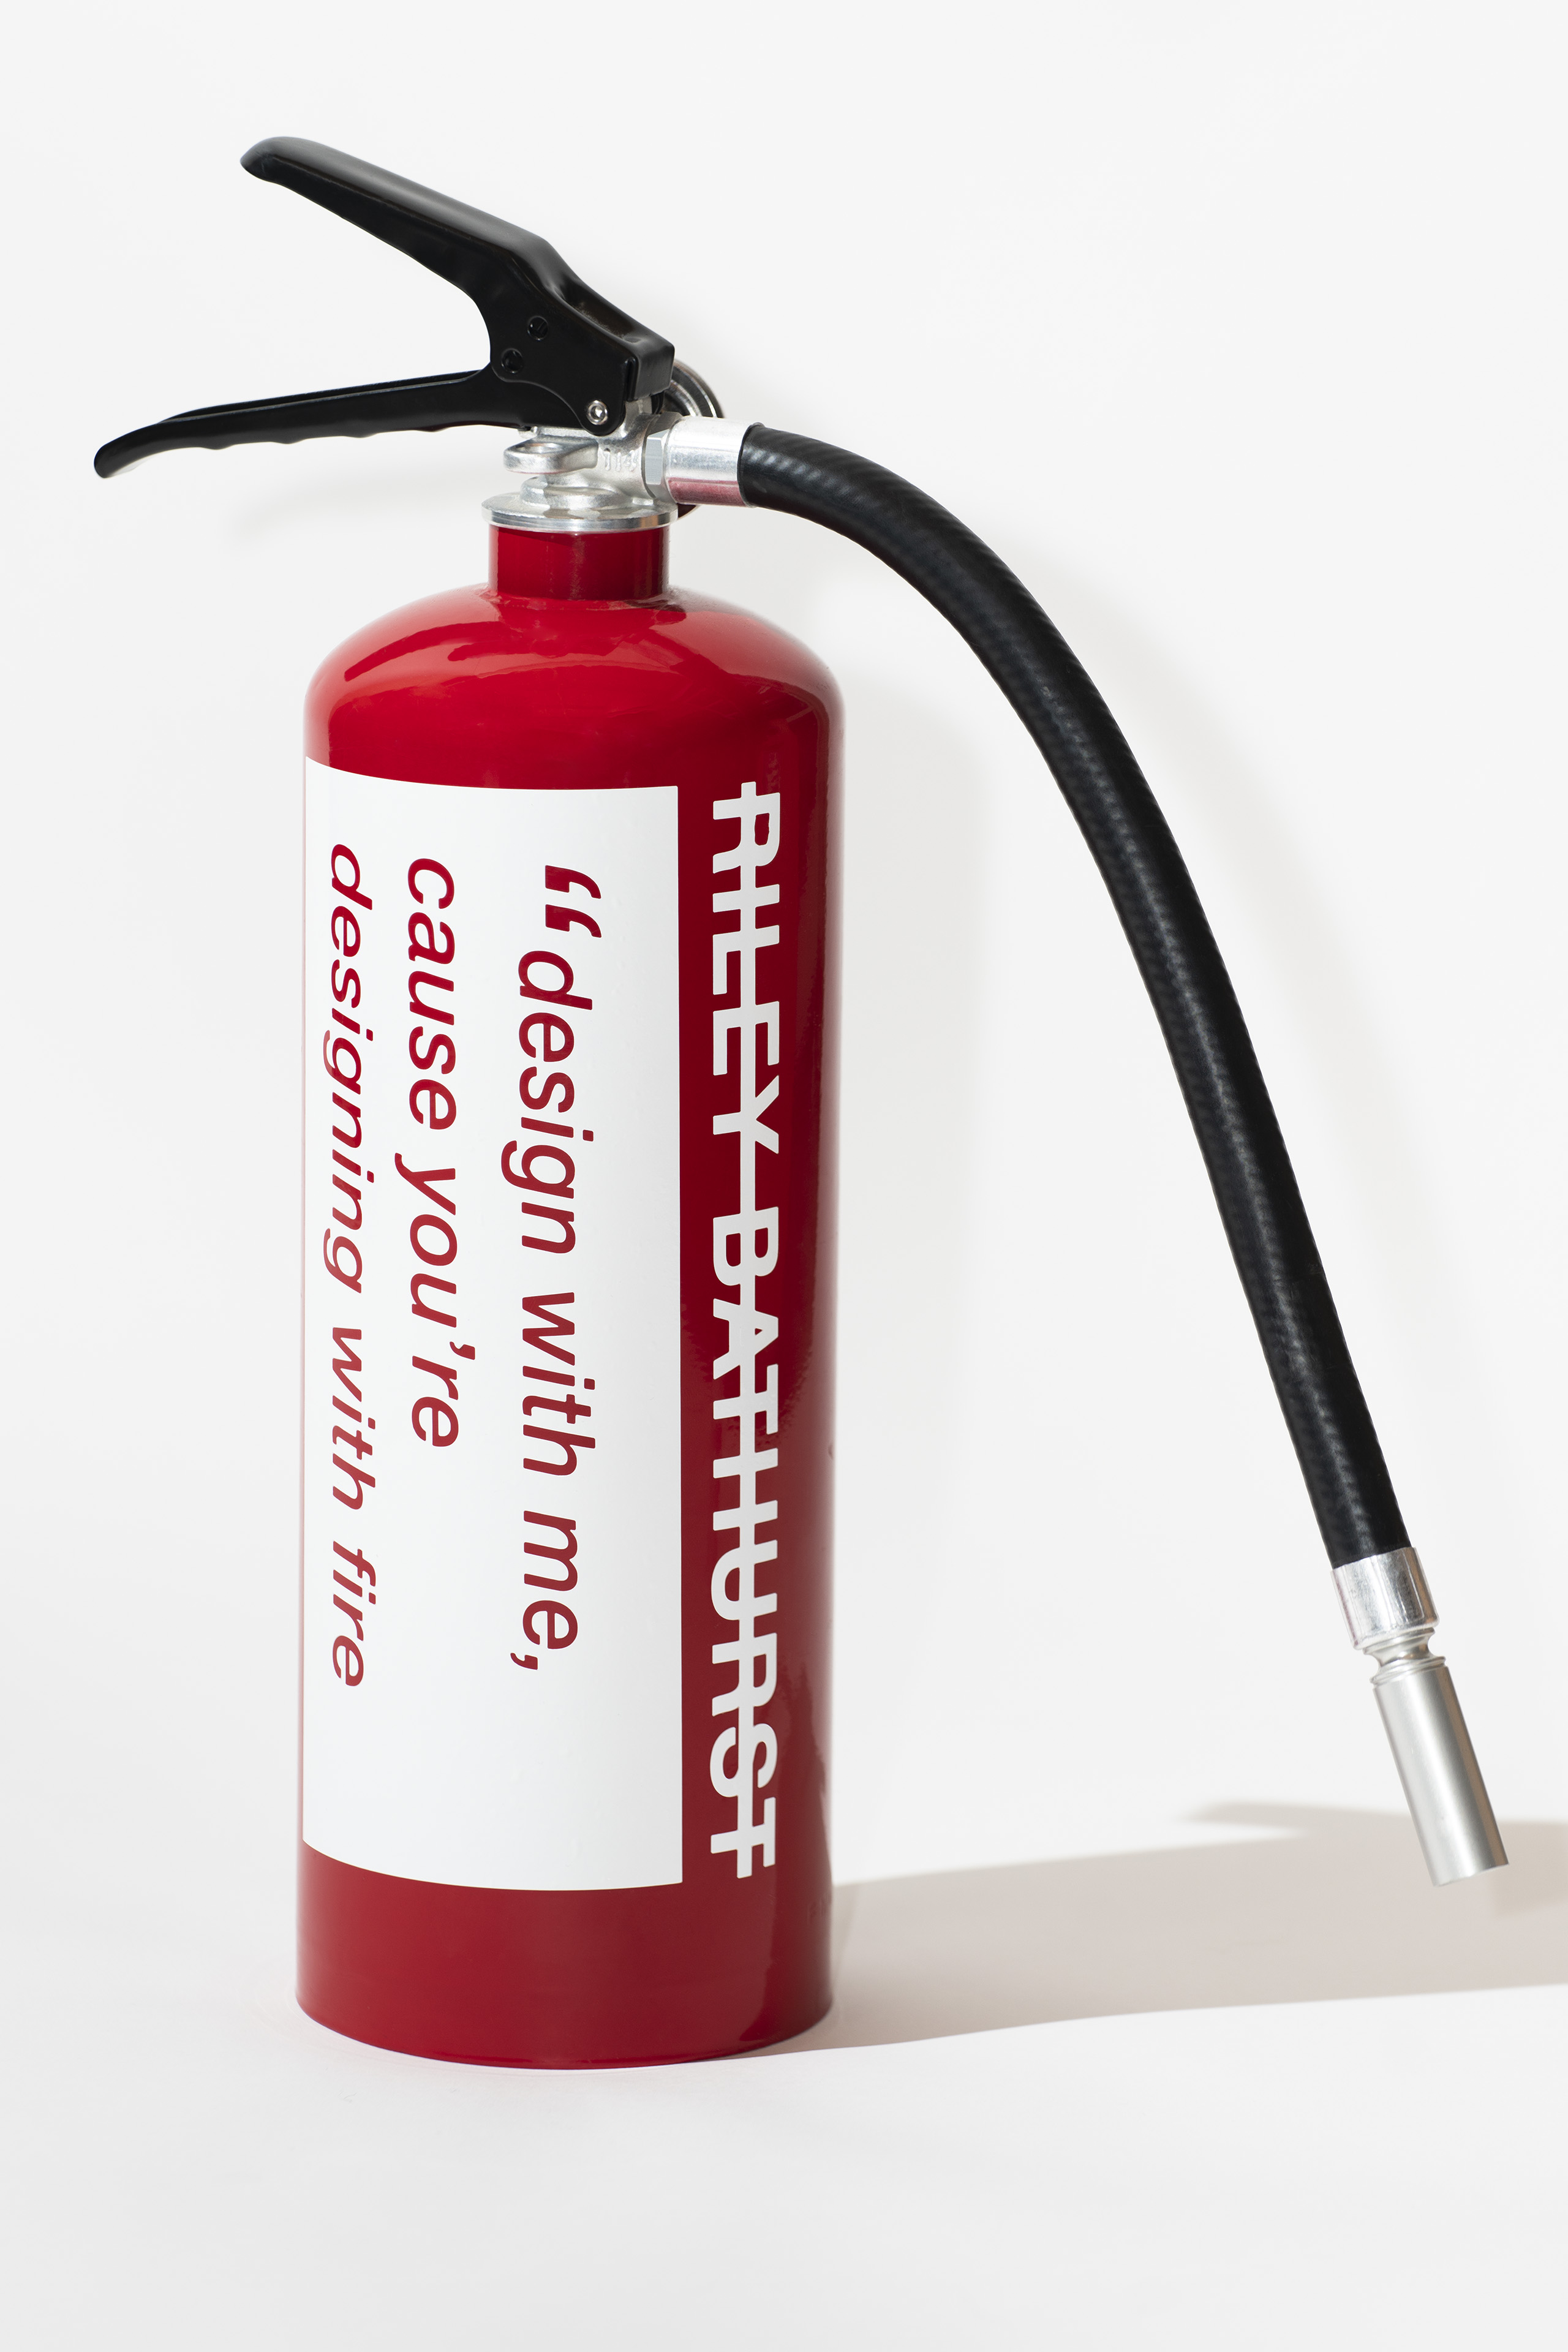 graphic design on a fire extinguisher